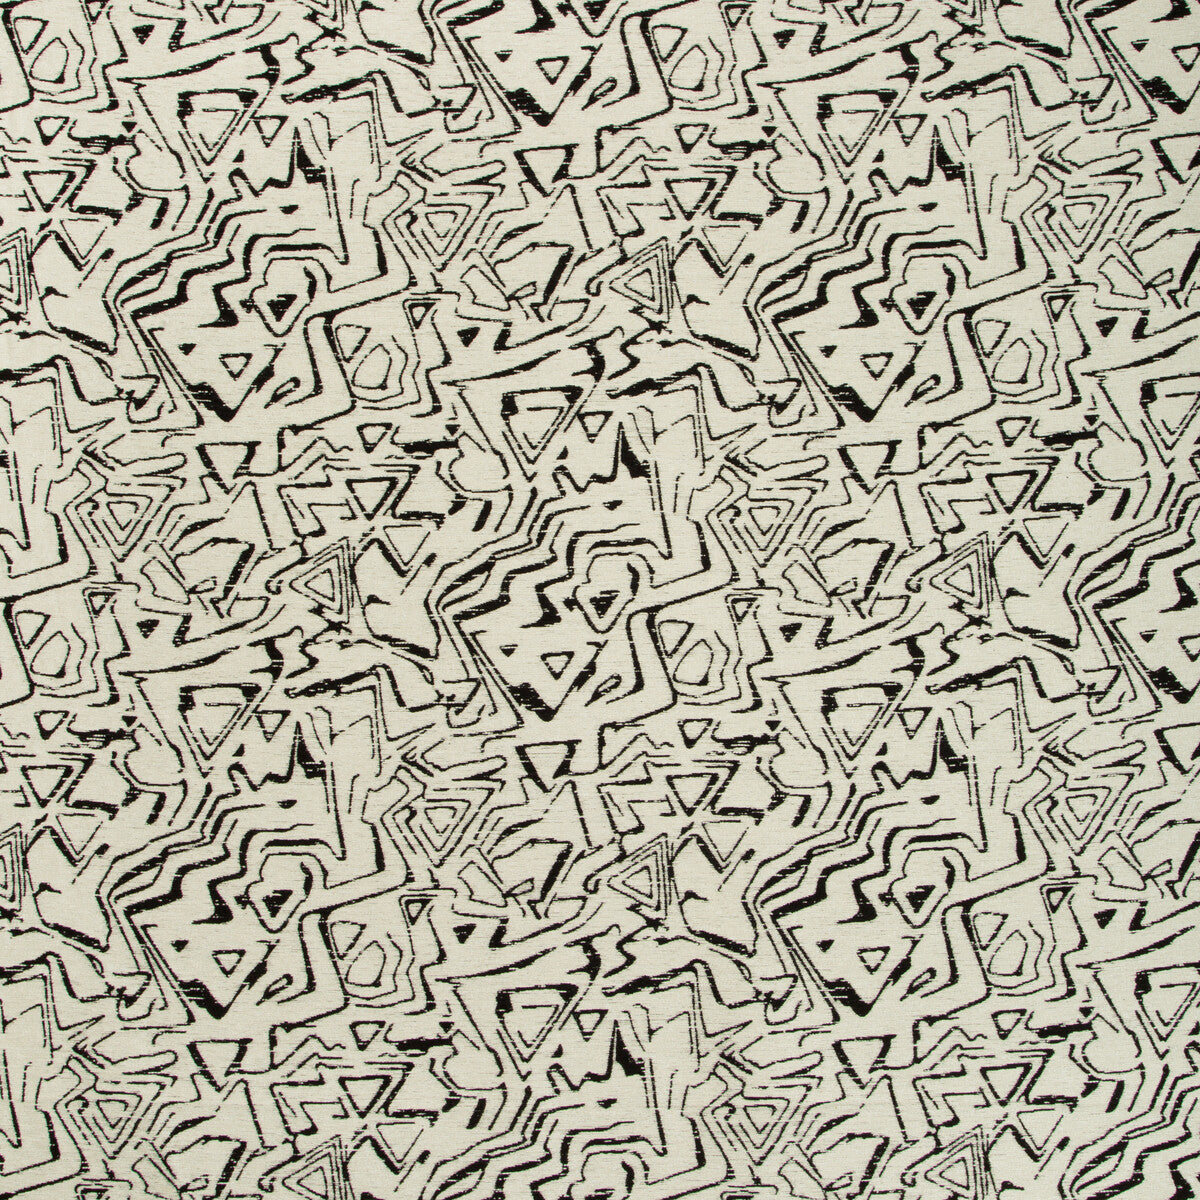 Kravet Contract fabric in 35030-8 color - pattern 35030.8.0 - by Kravet Contract in the Incase Crypton Gis collection